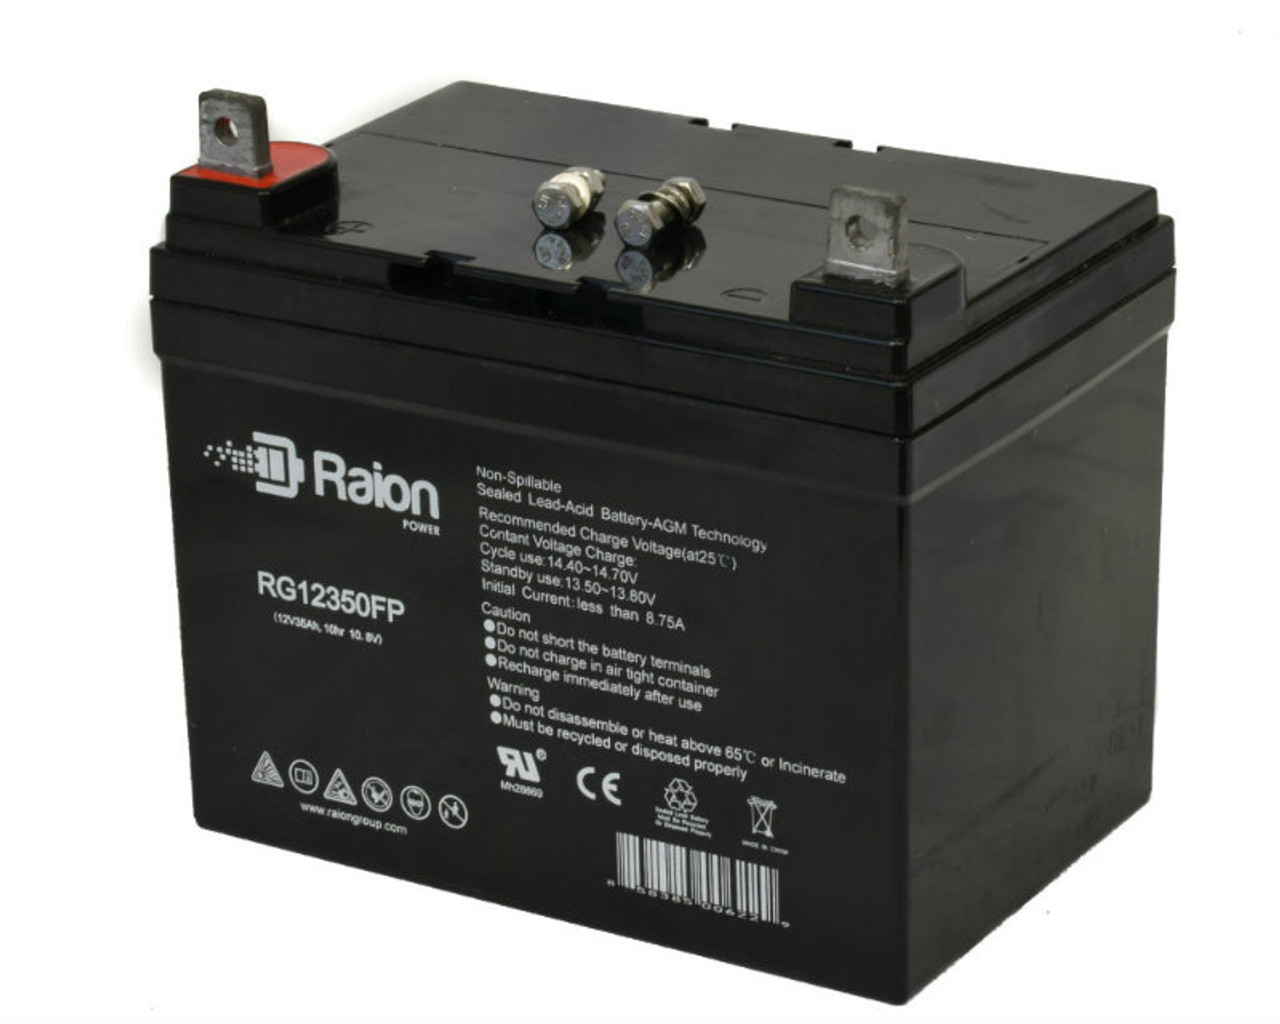 Raion Power Replacement 12V 35Ah RG12350FP Battery for Dynamark 8-HP